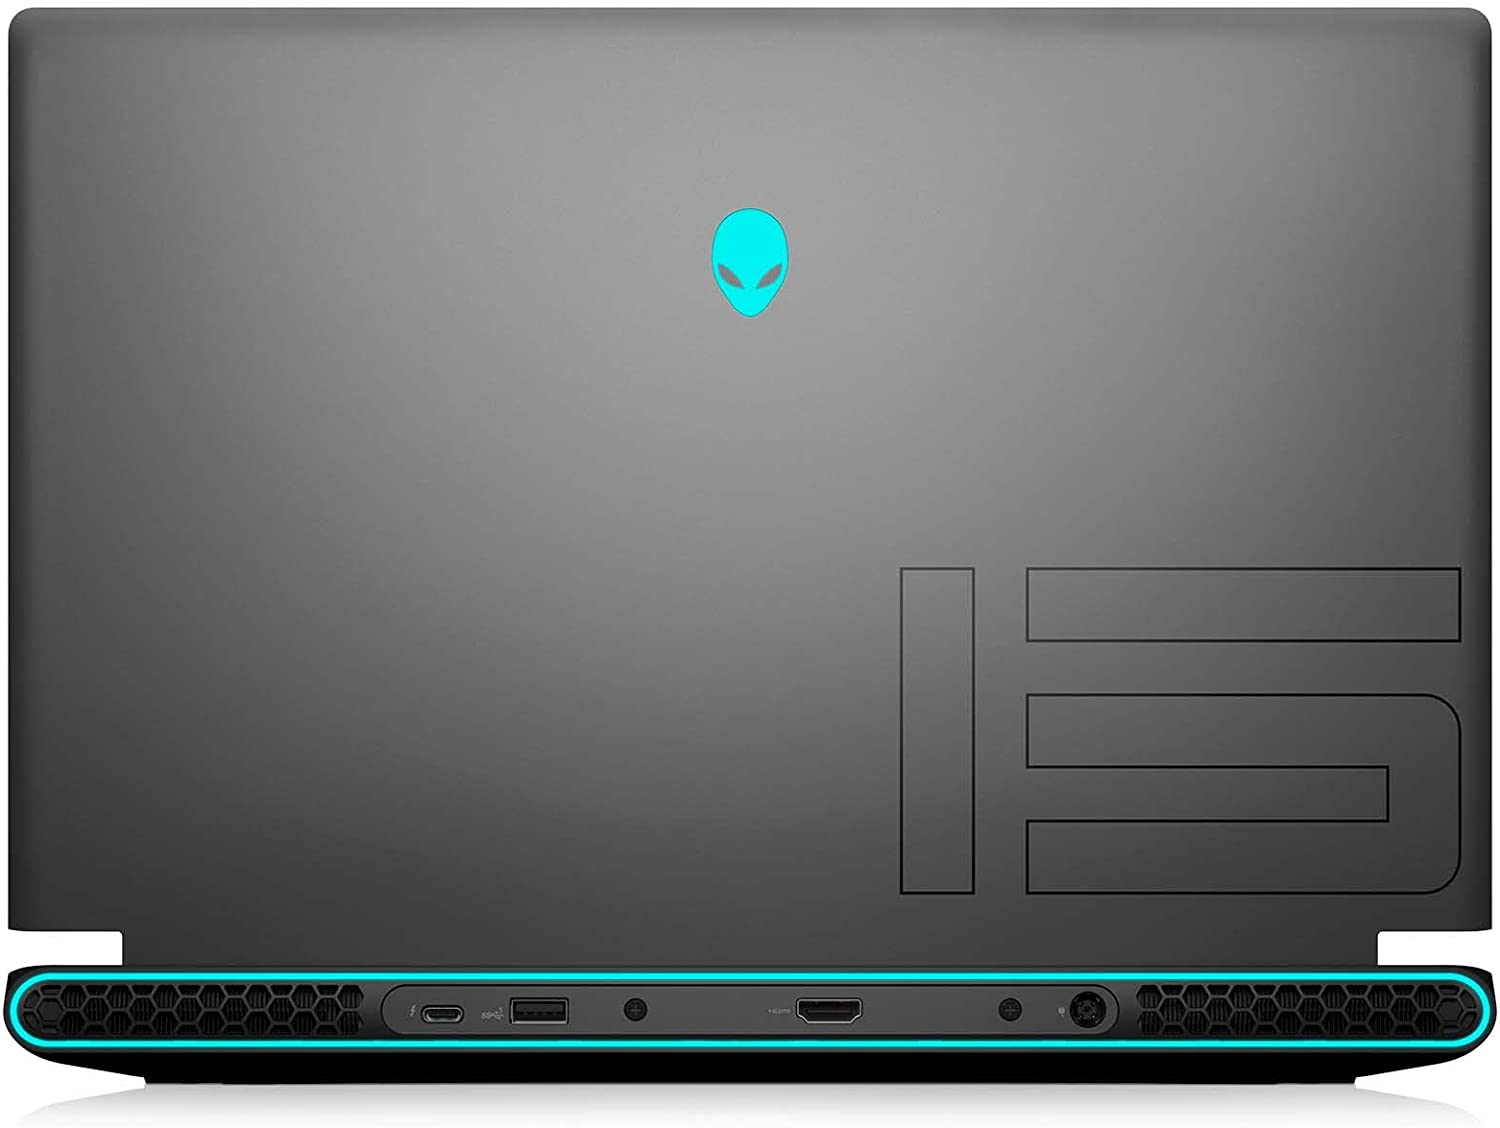 This image shows the Alienware M15 R7.